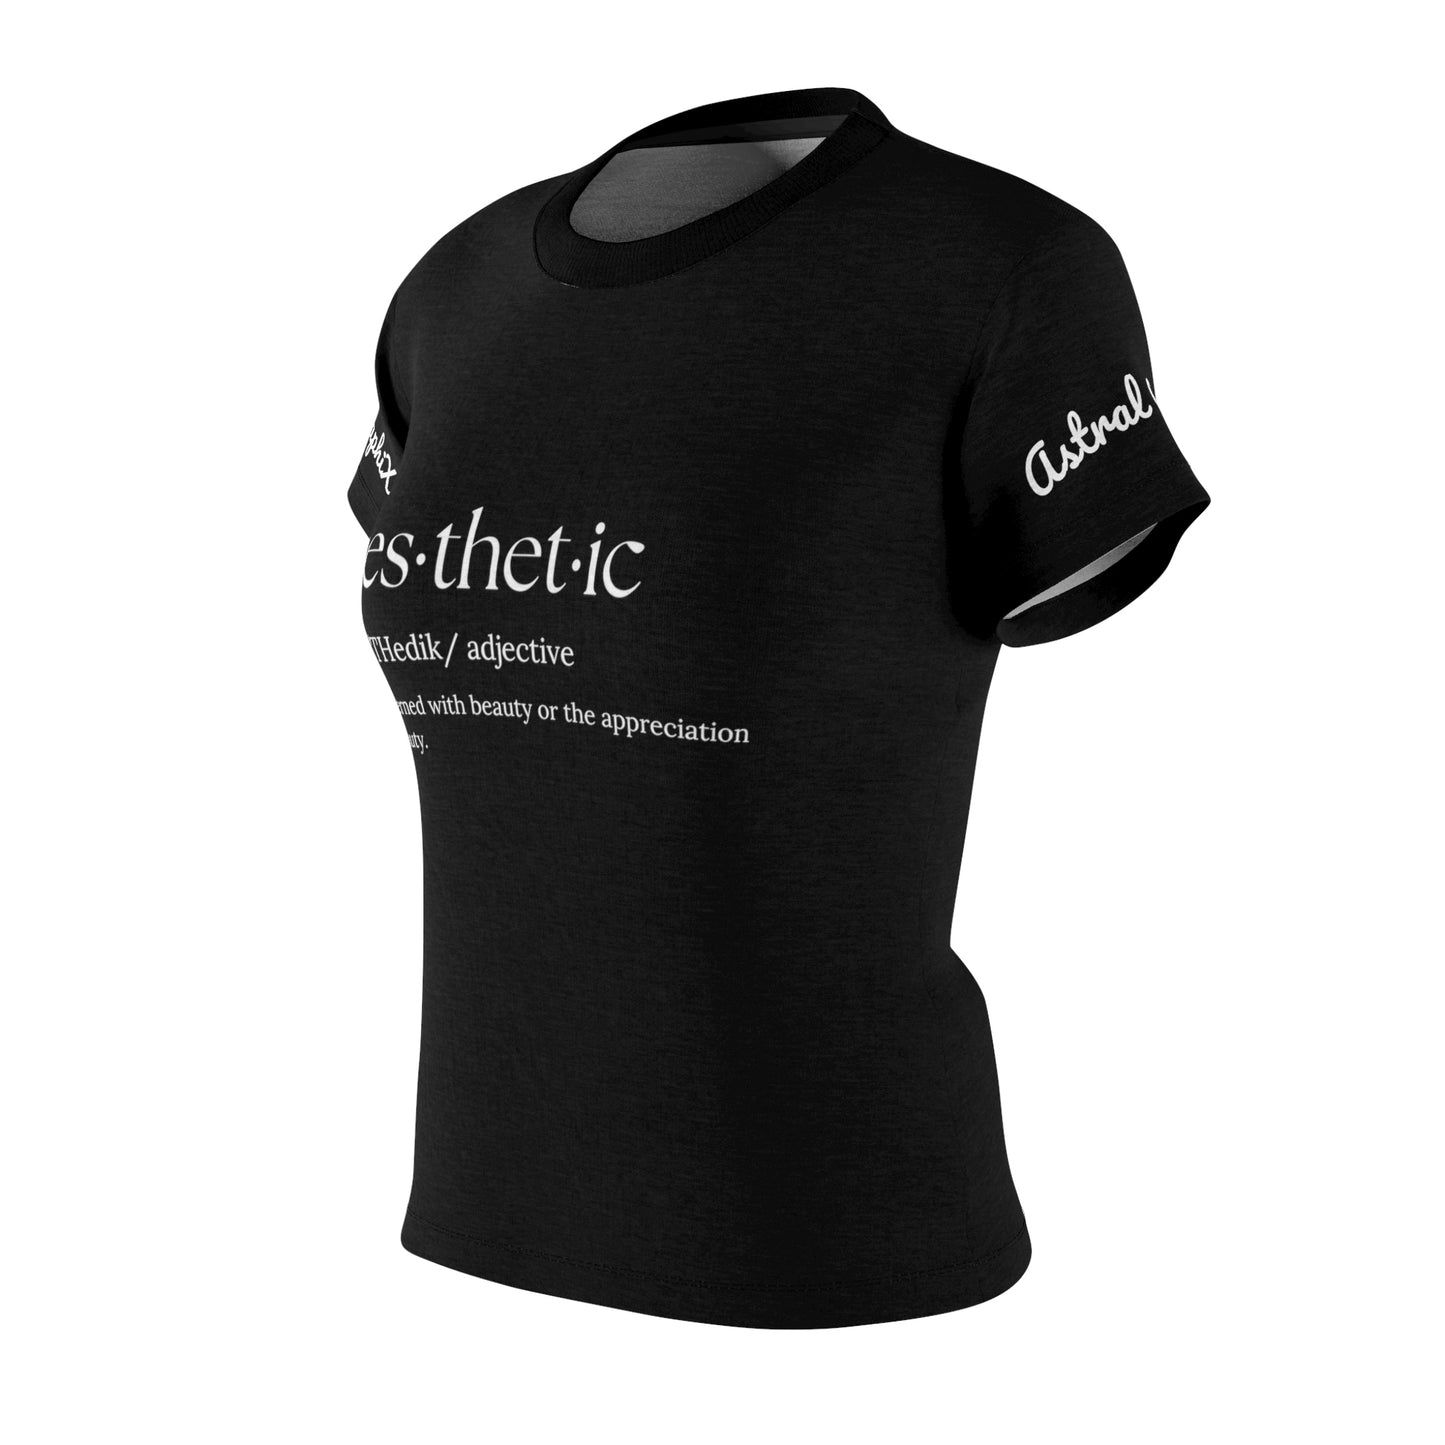 Word Art Collection - Women's Cut & Sew Tee (AOP) - Aes-thet-ic in Black